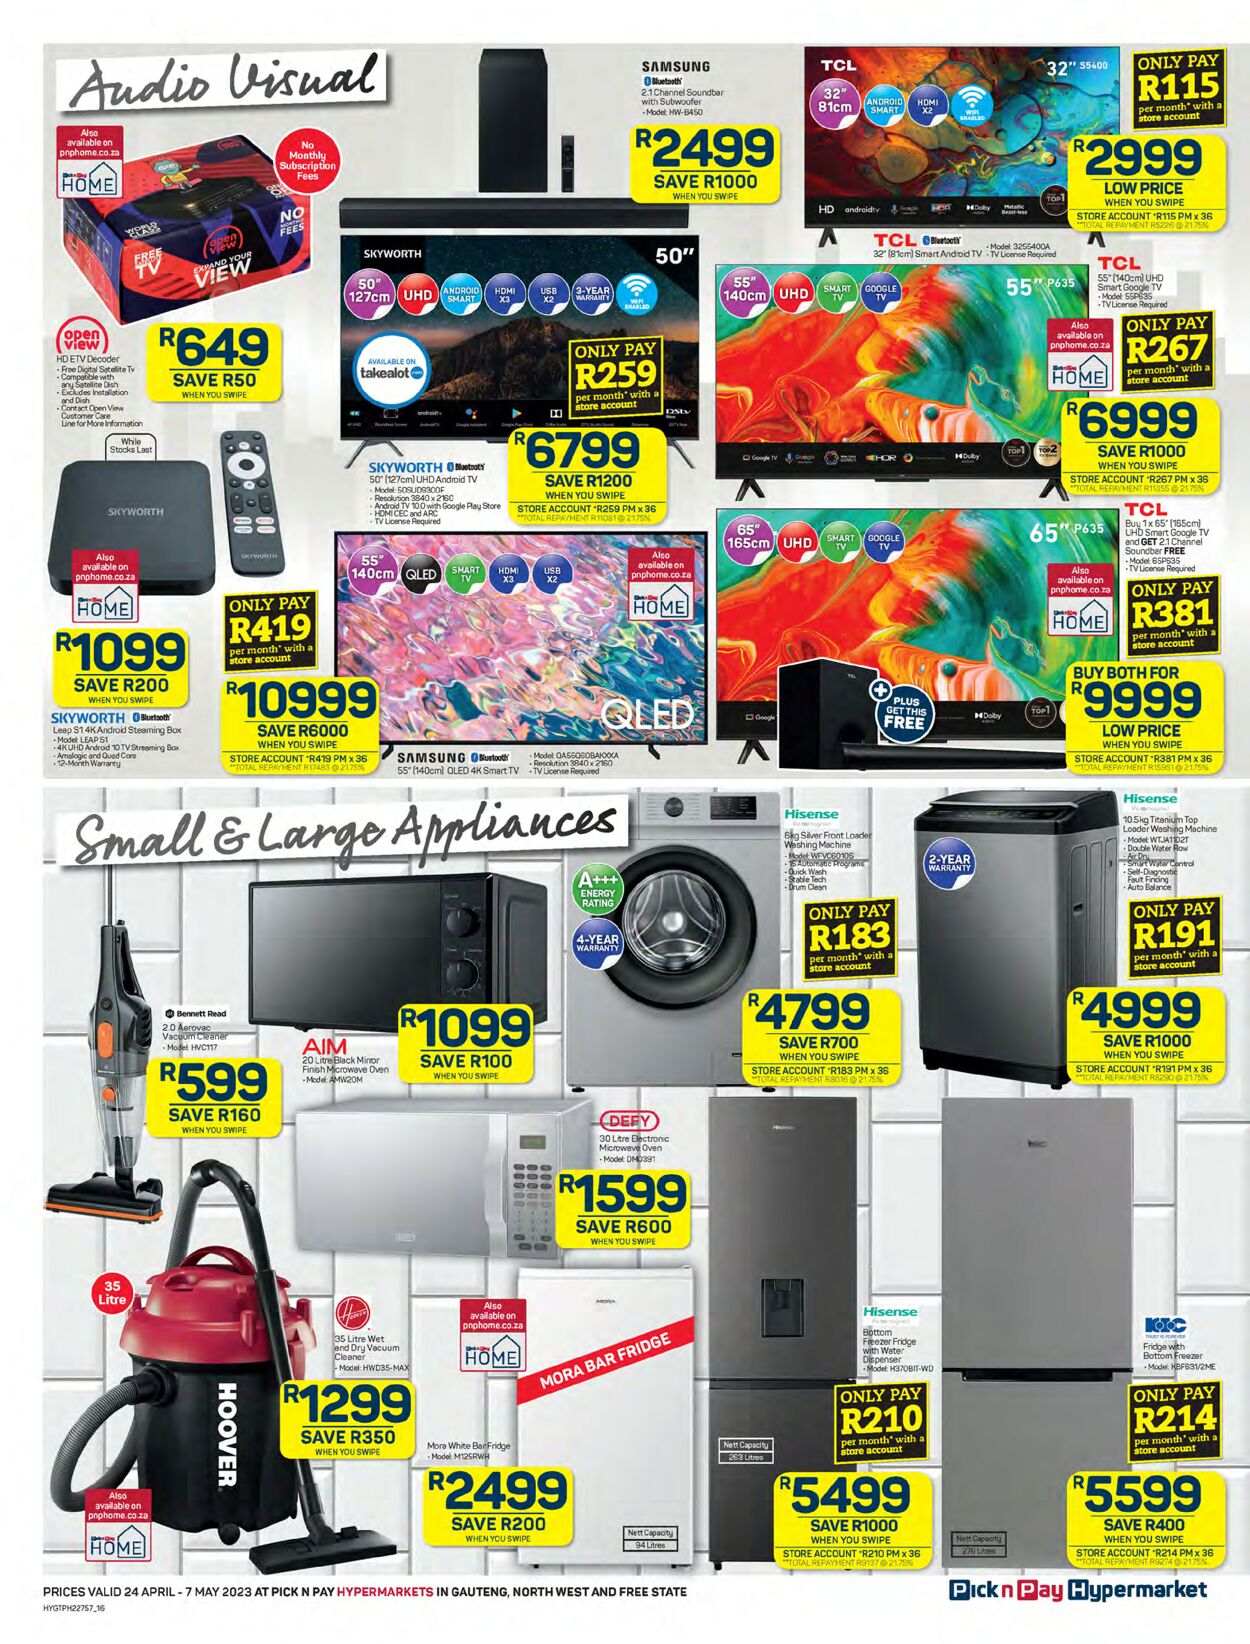 Pick n Pay Catalogue - 2023/04/24-2023/05/07 (Page 16)